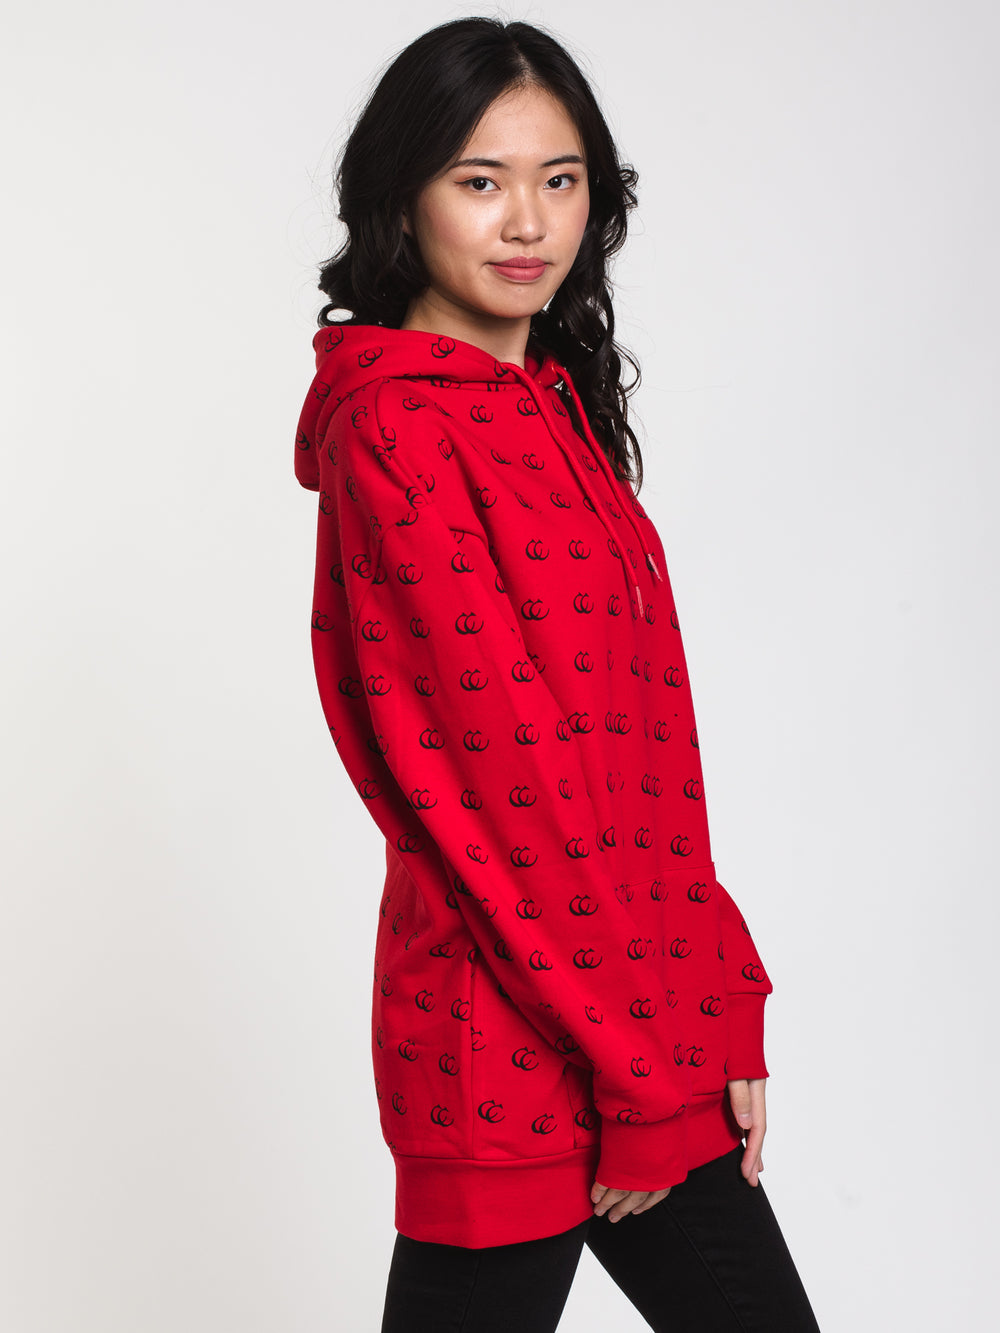 C&amp;C ALL OVER PRINT HOODIE FLEECE - RED - CLEARANCE